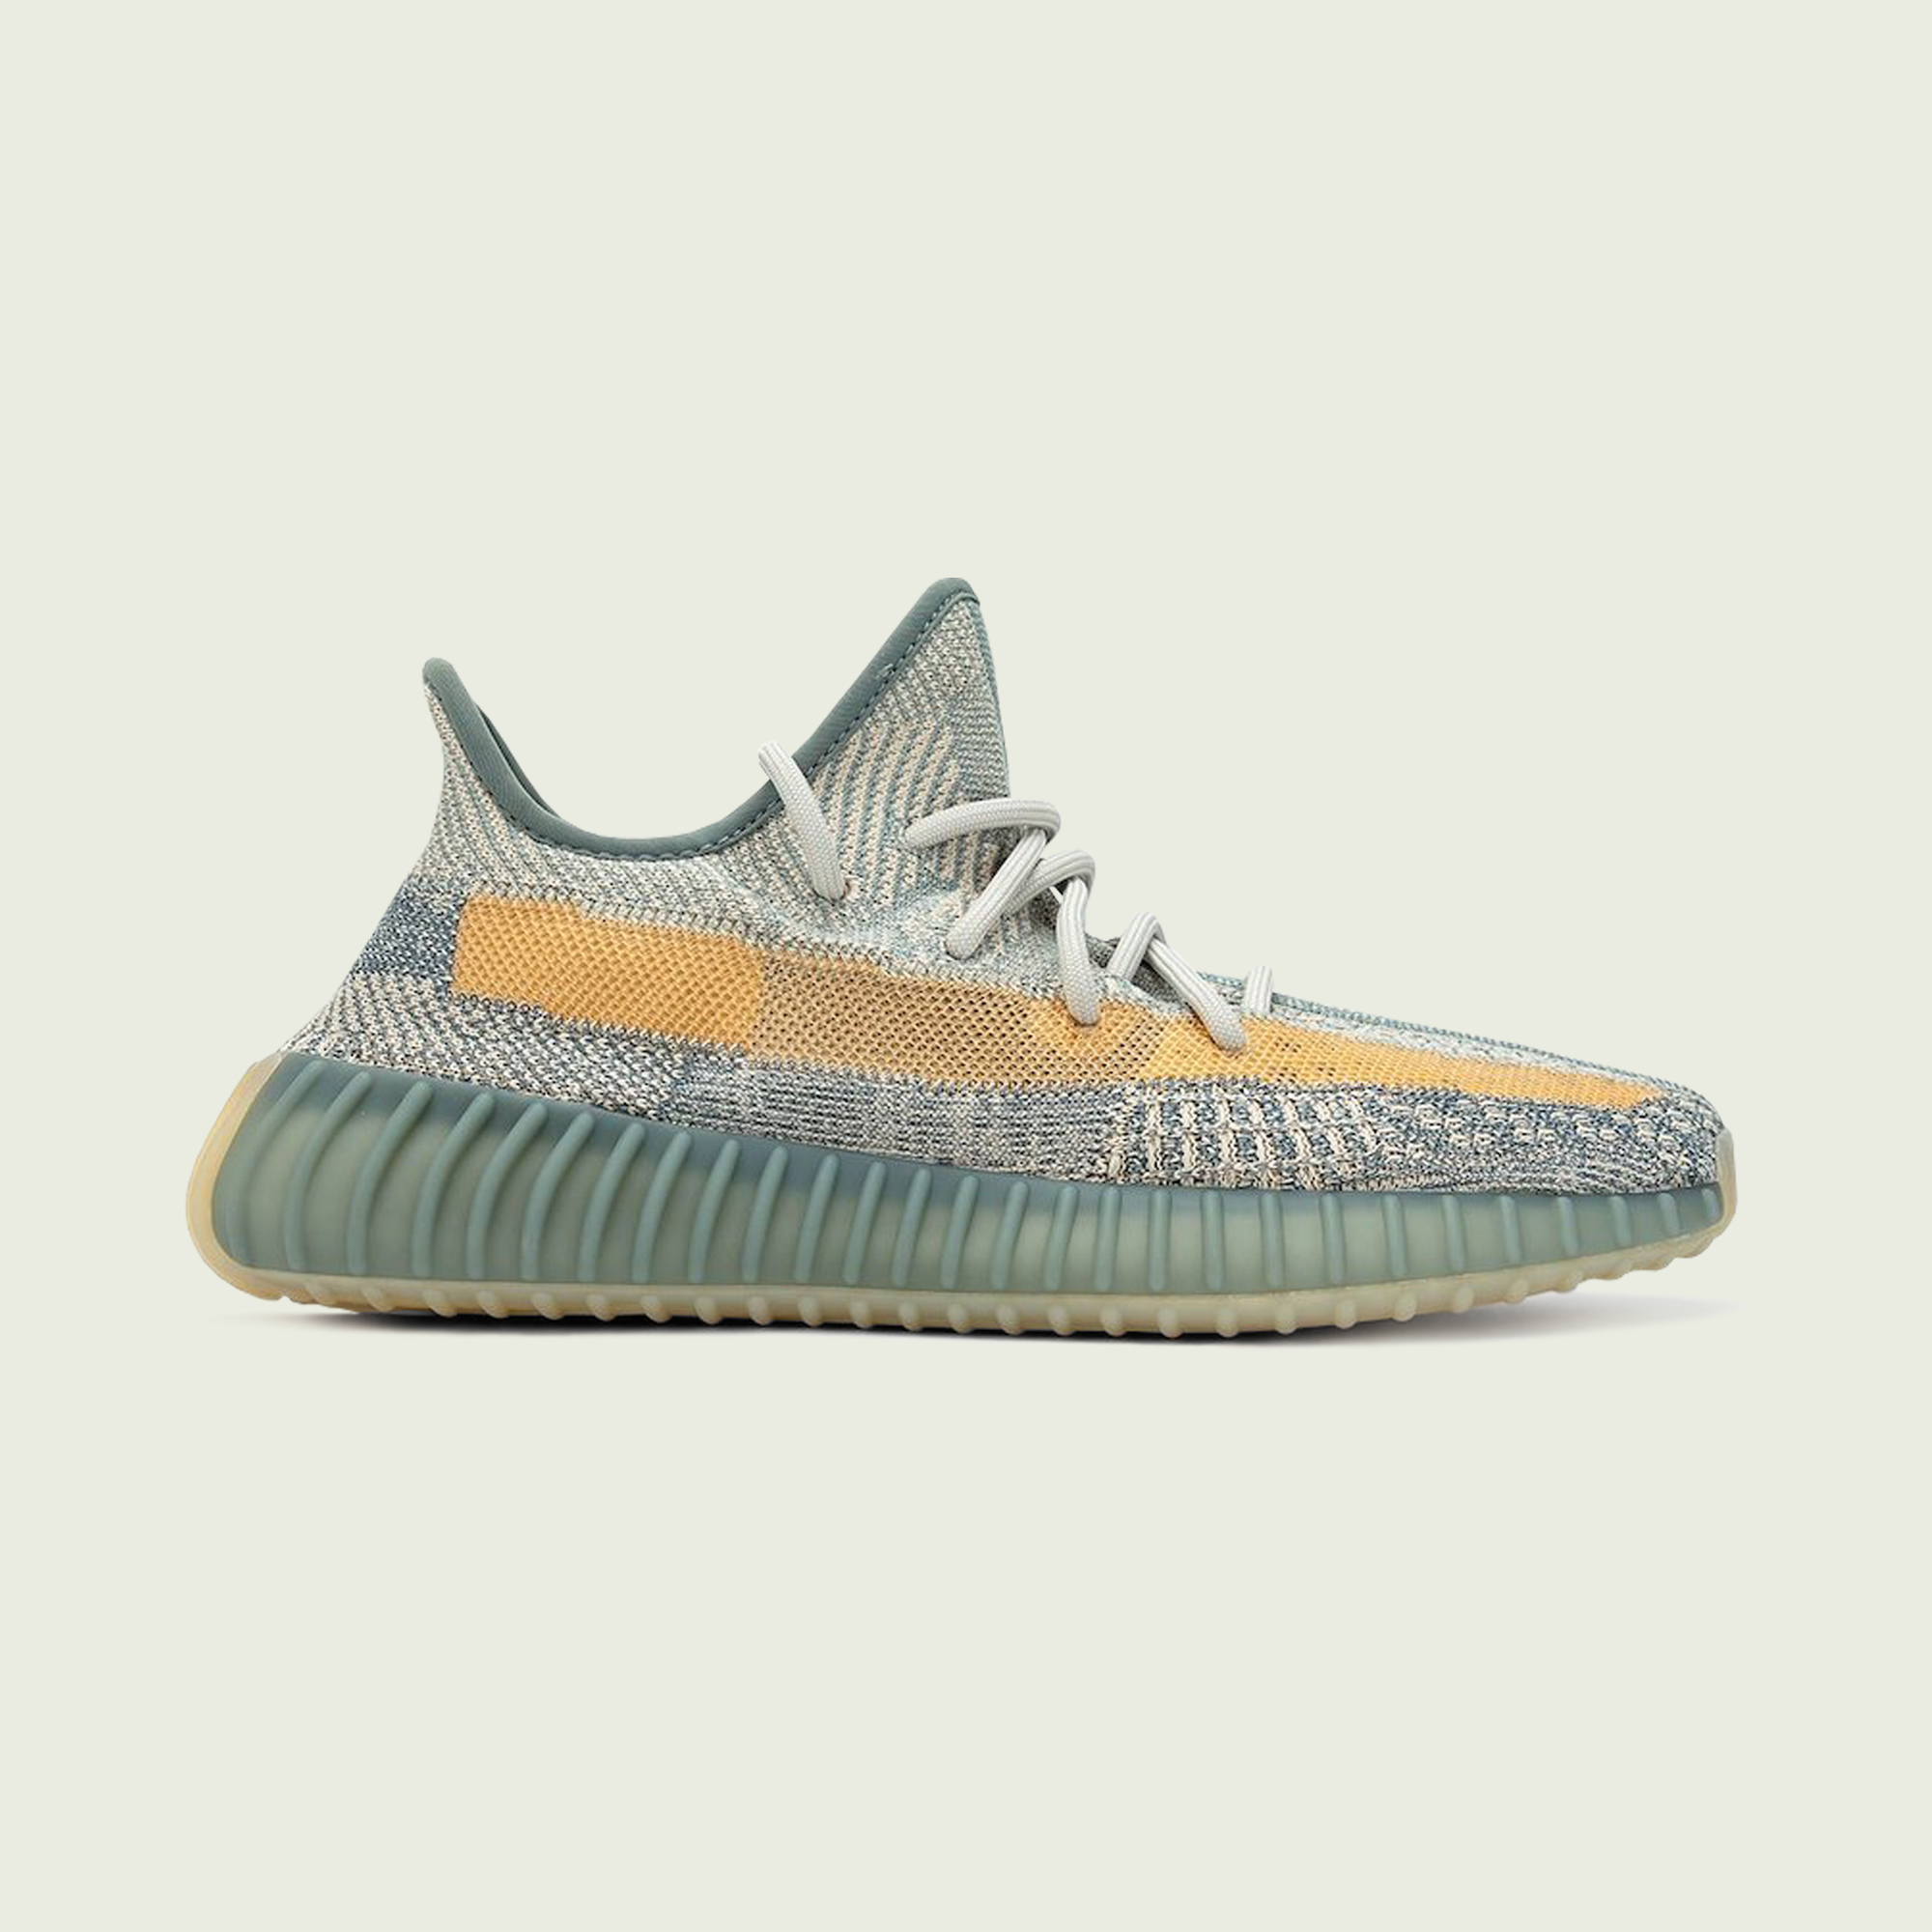 yeezy boost 350 v2 upcoming releases